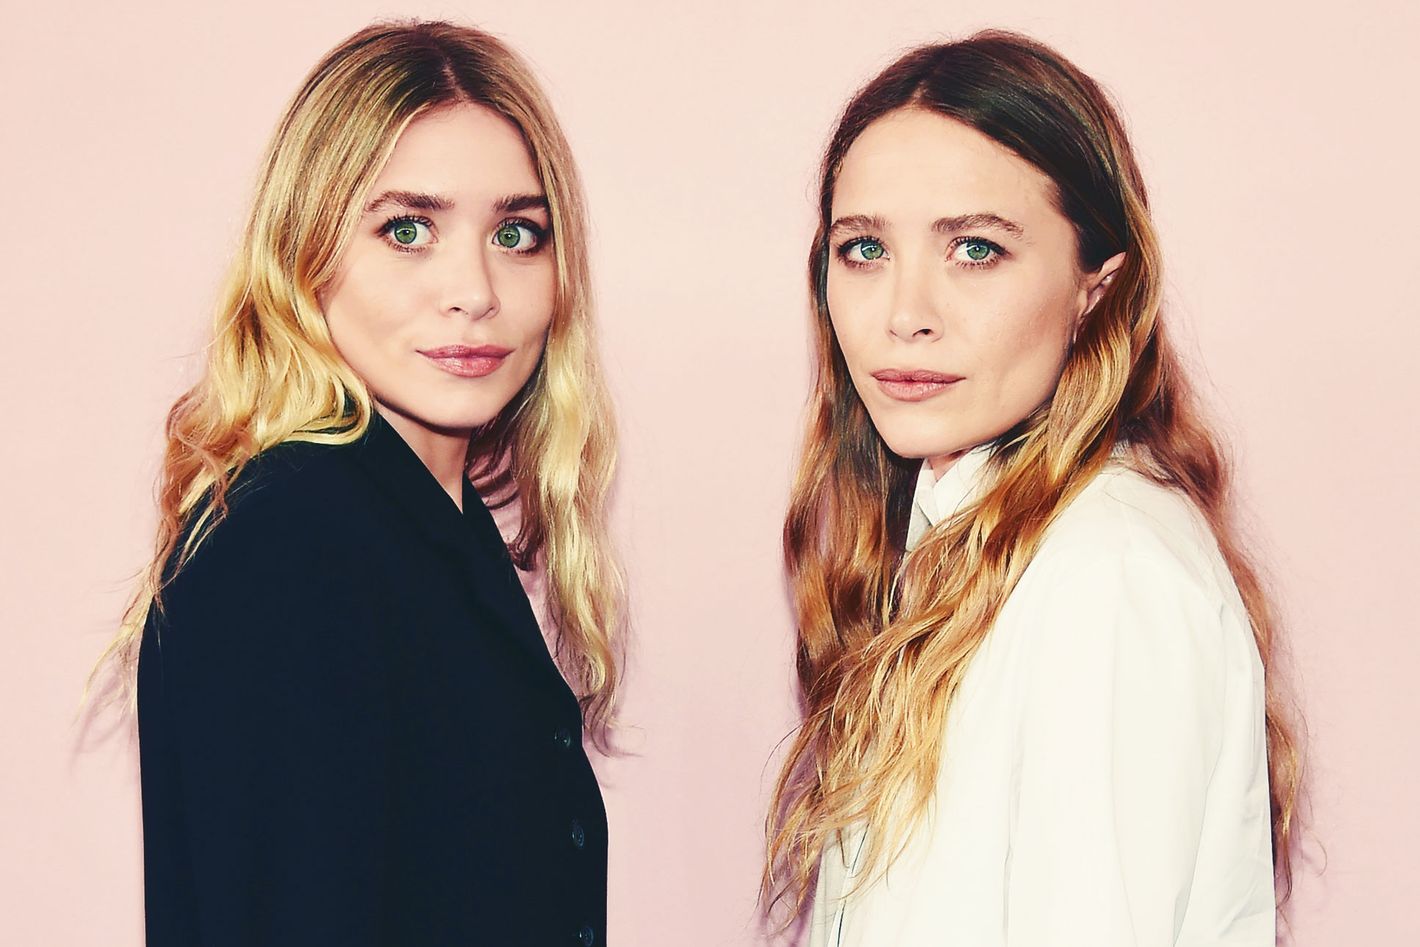 Take a page from the Olsen twins with this bag trend